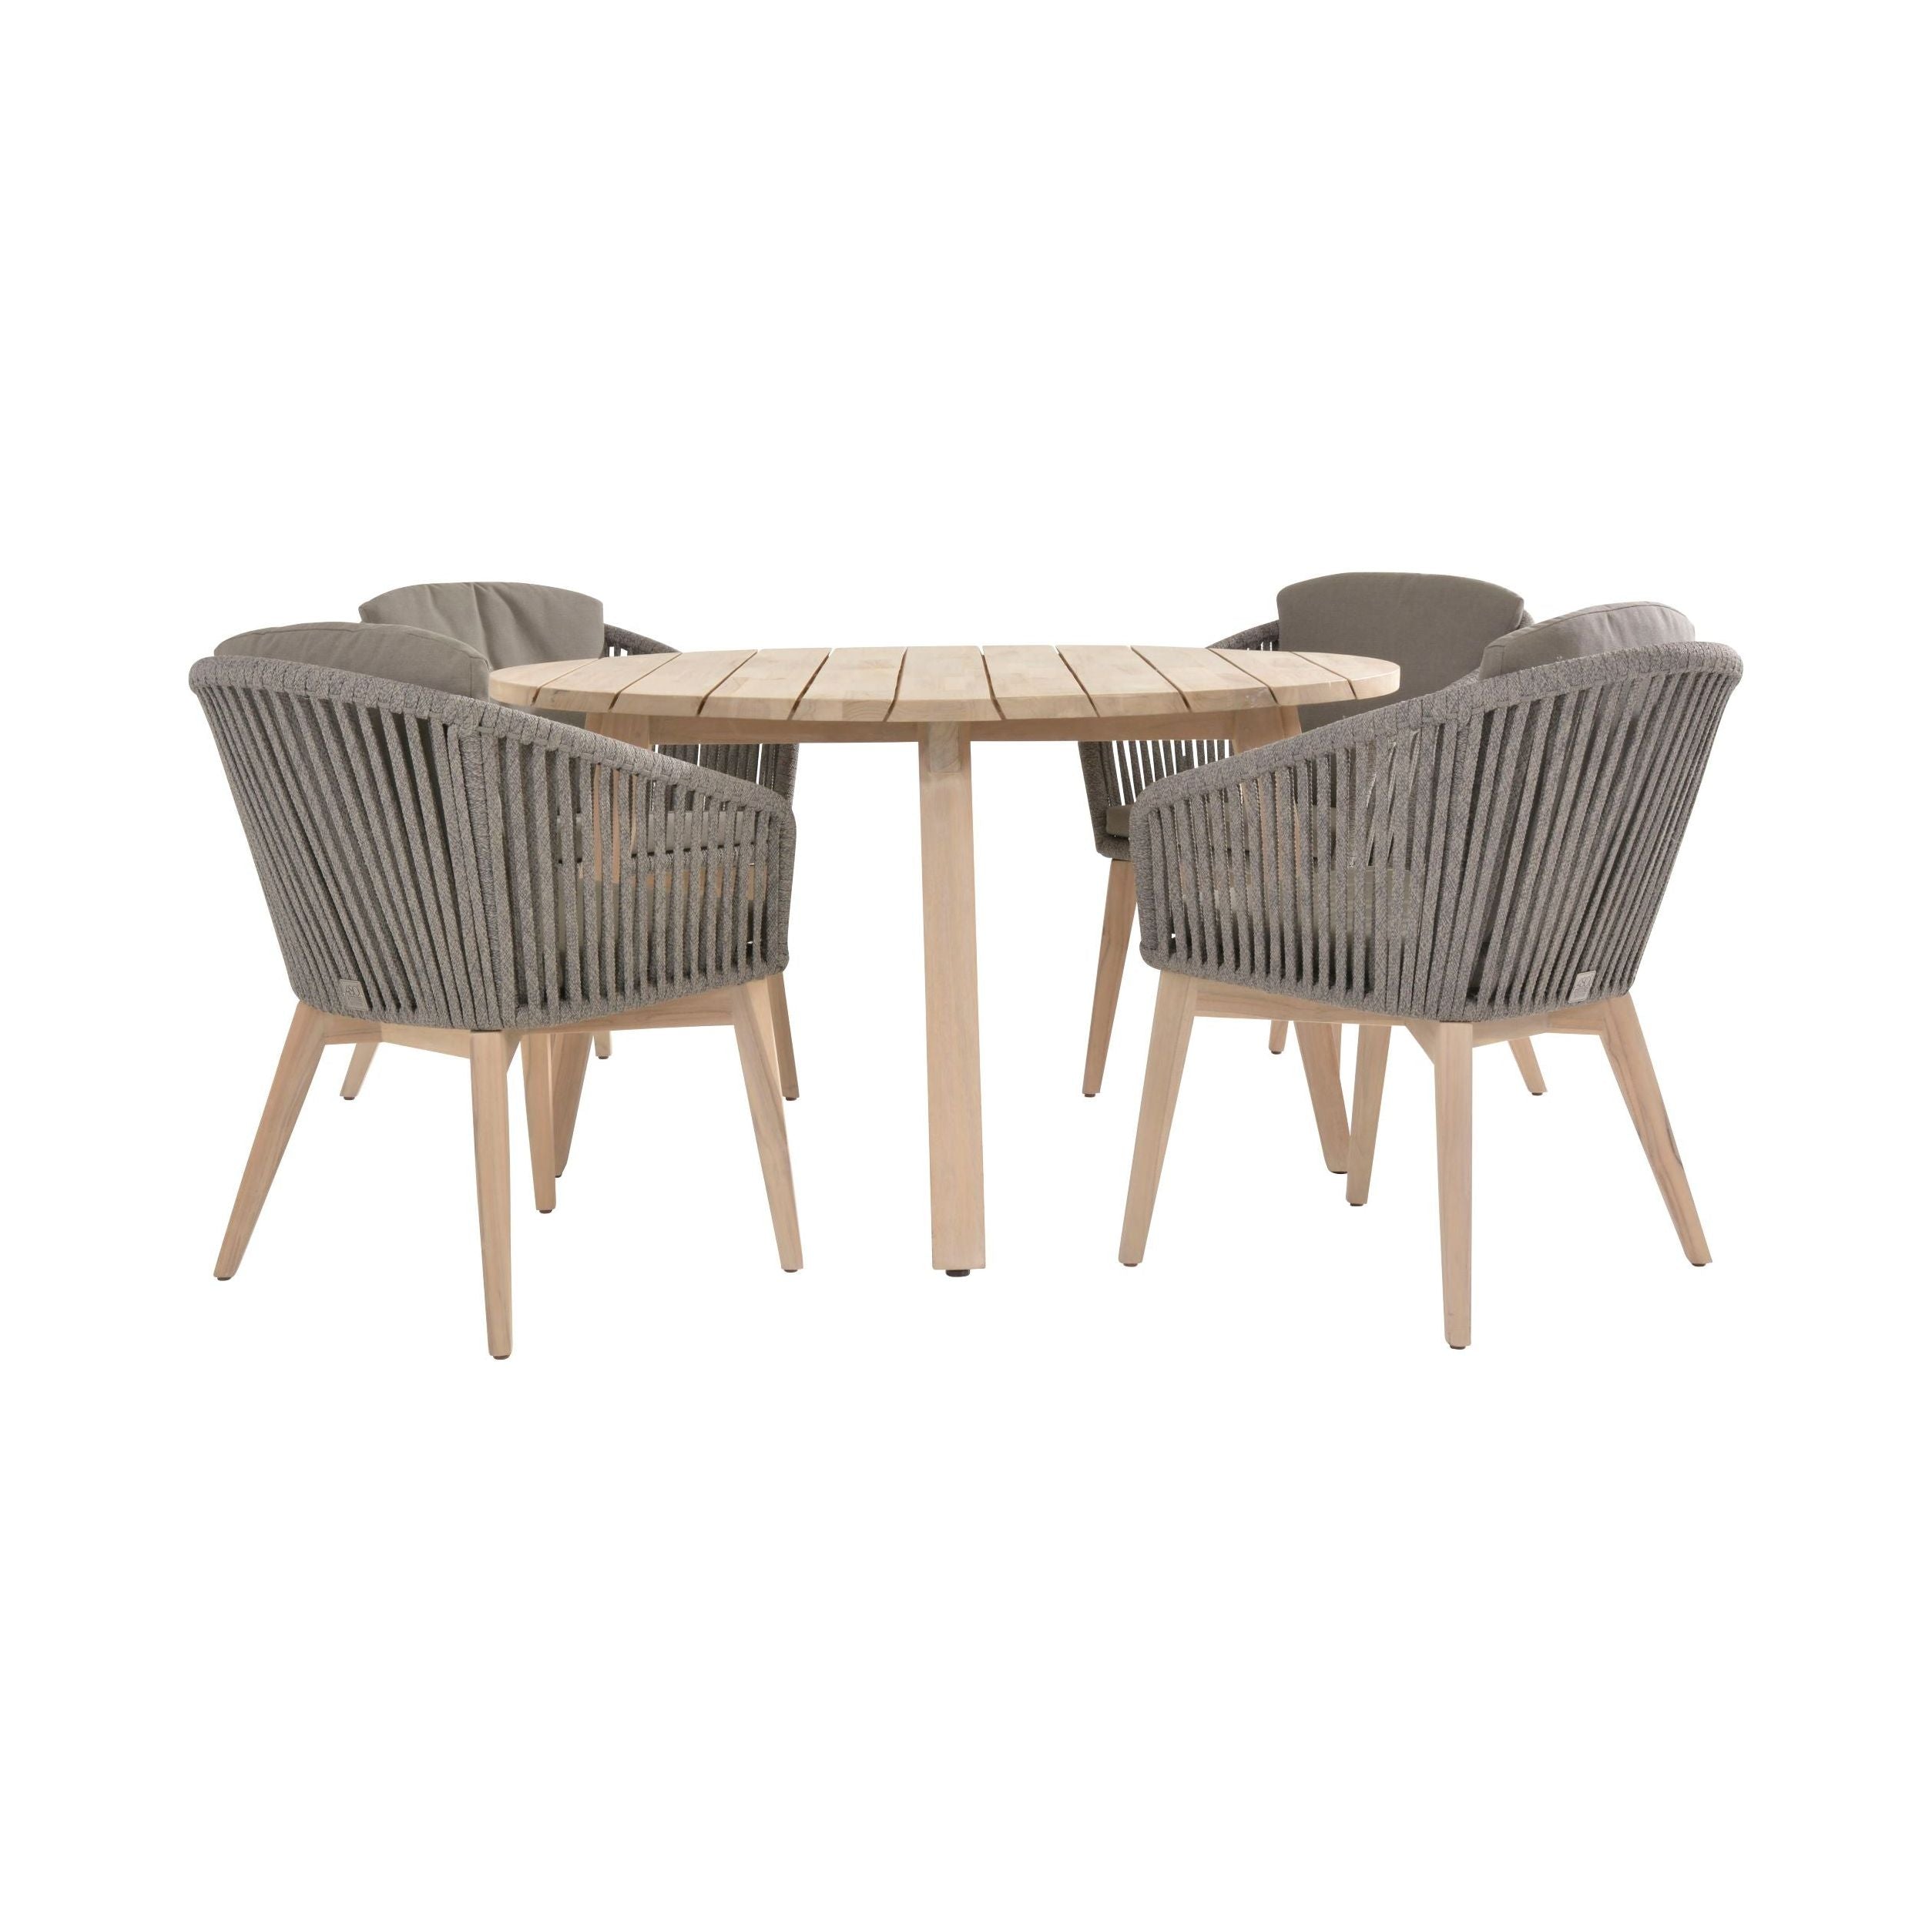 4 Seasons Outdoor Santander 4 Seat Dining with Derby Table